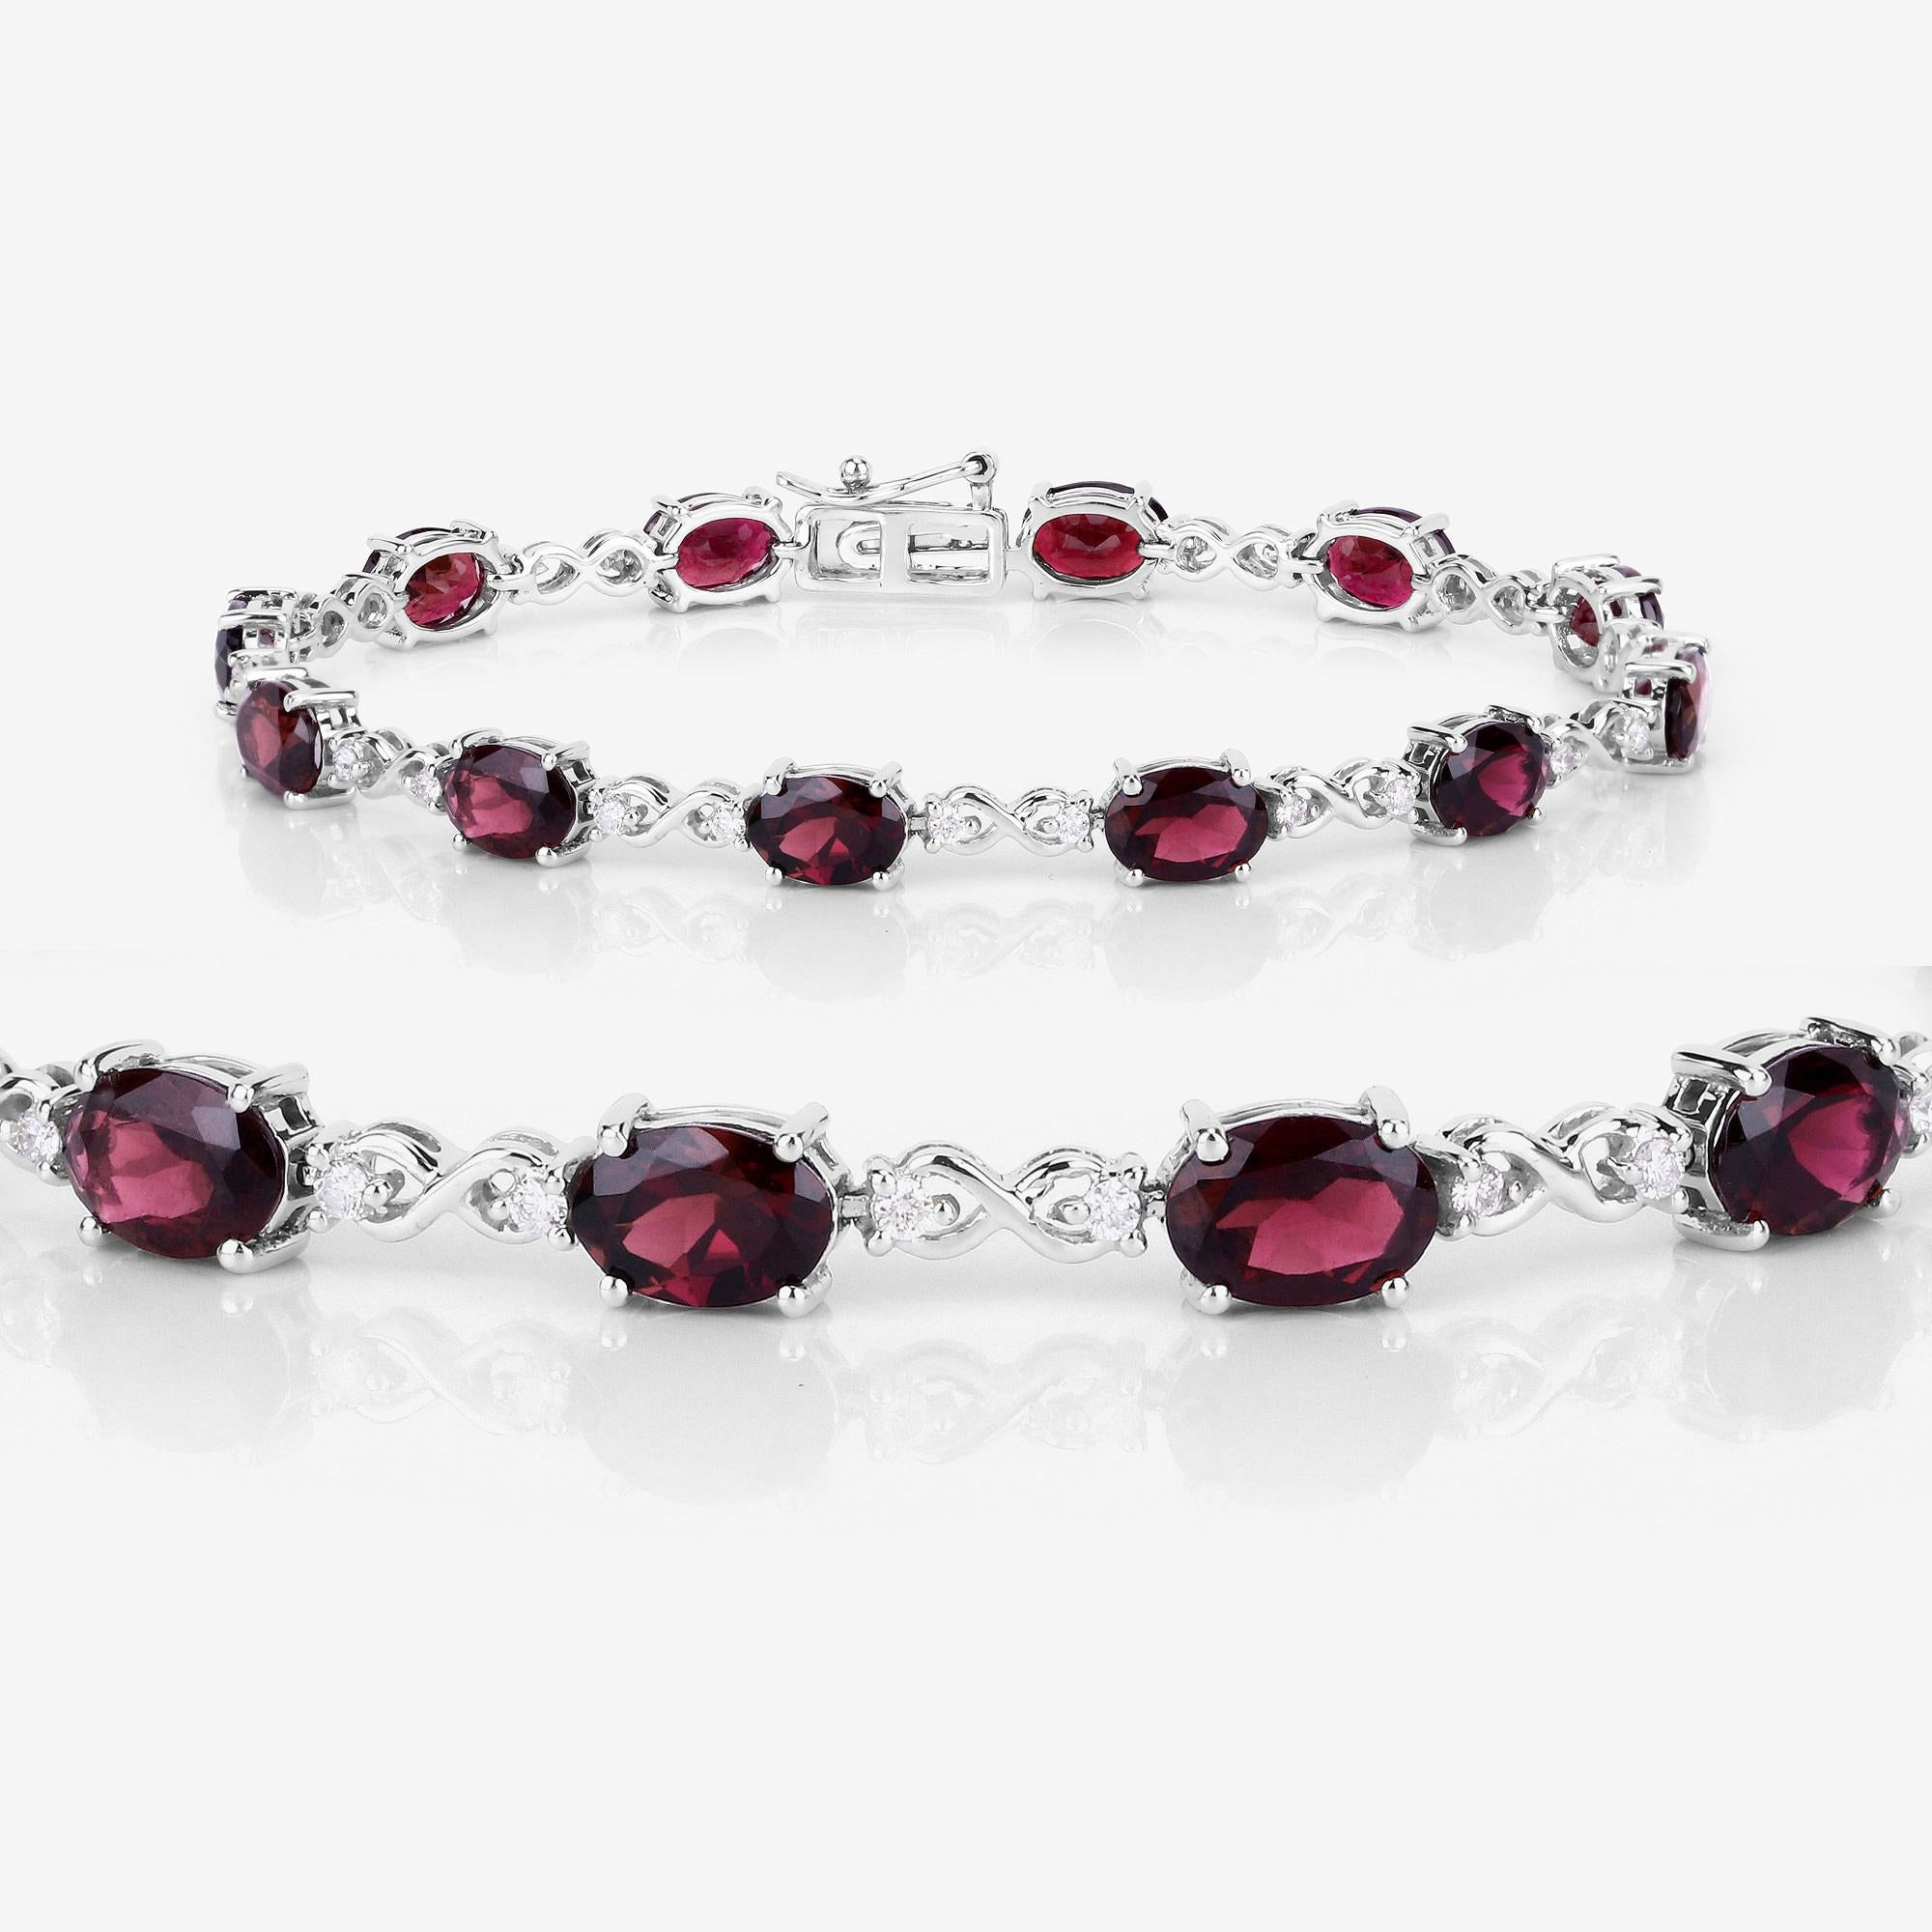 Oval Cut Important Pink Tourmaline and Diamond Tennis Bracelet 8.25 Carats 14k White Gold For Sale